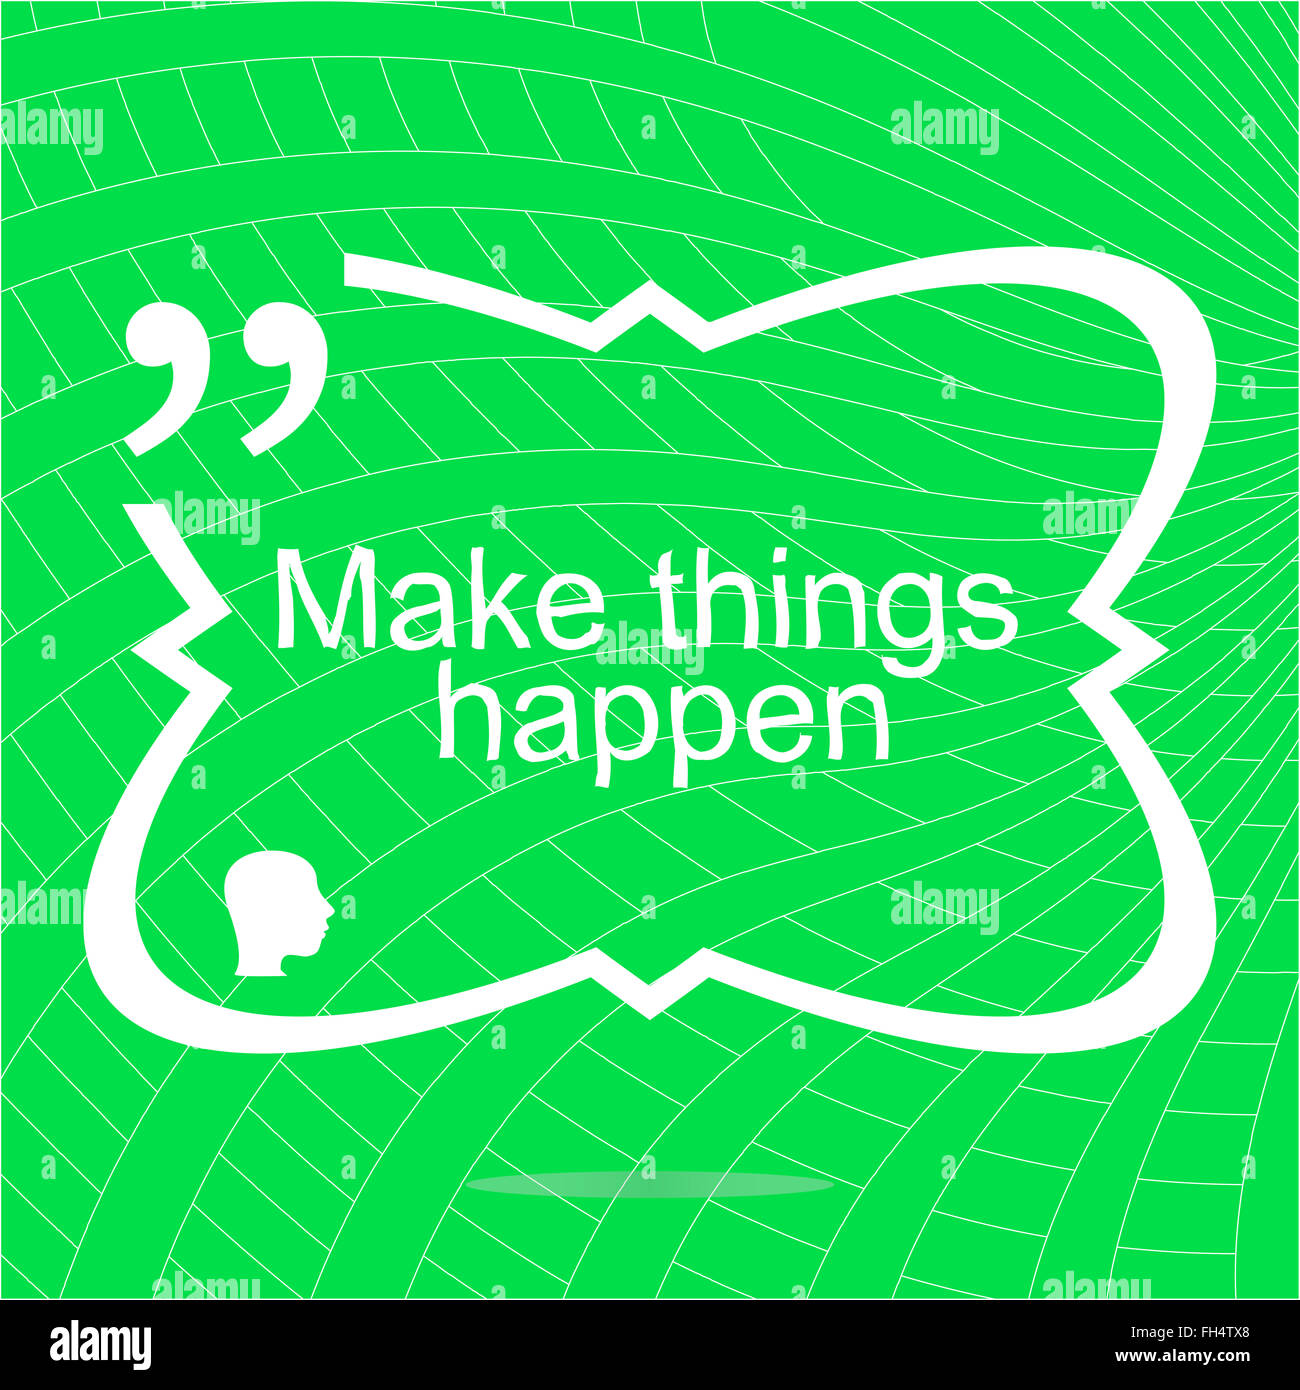 Make things happen. Inspirational motivational quote. Simple trendy design. Positive quote. Vector illustration Stock Photo